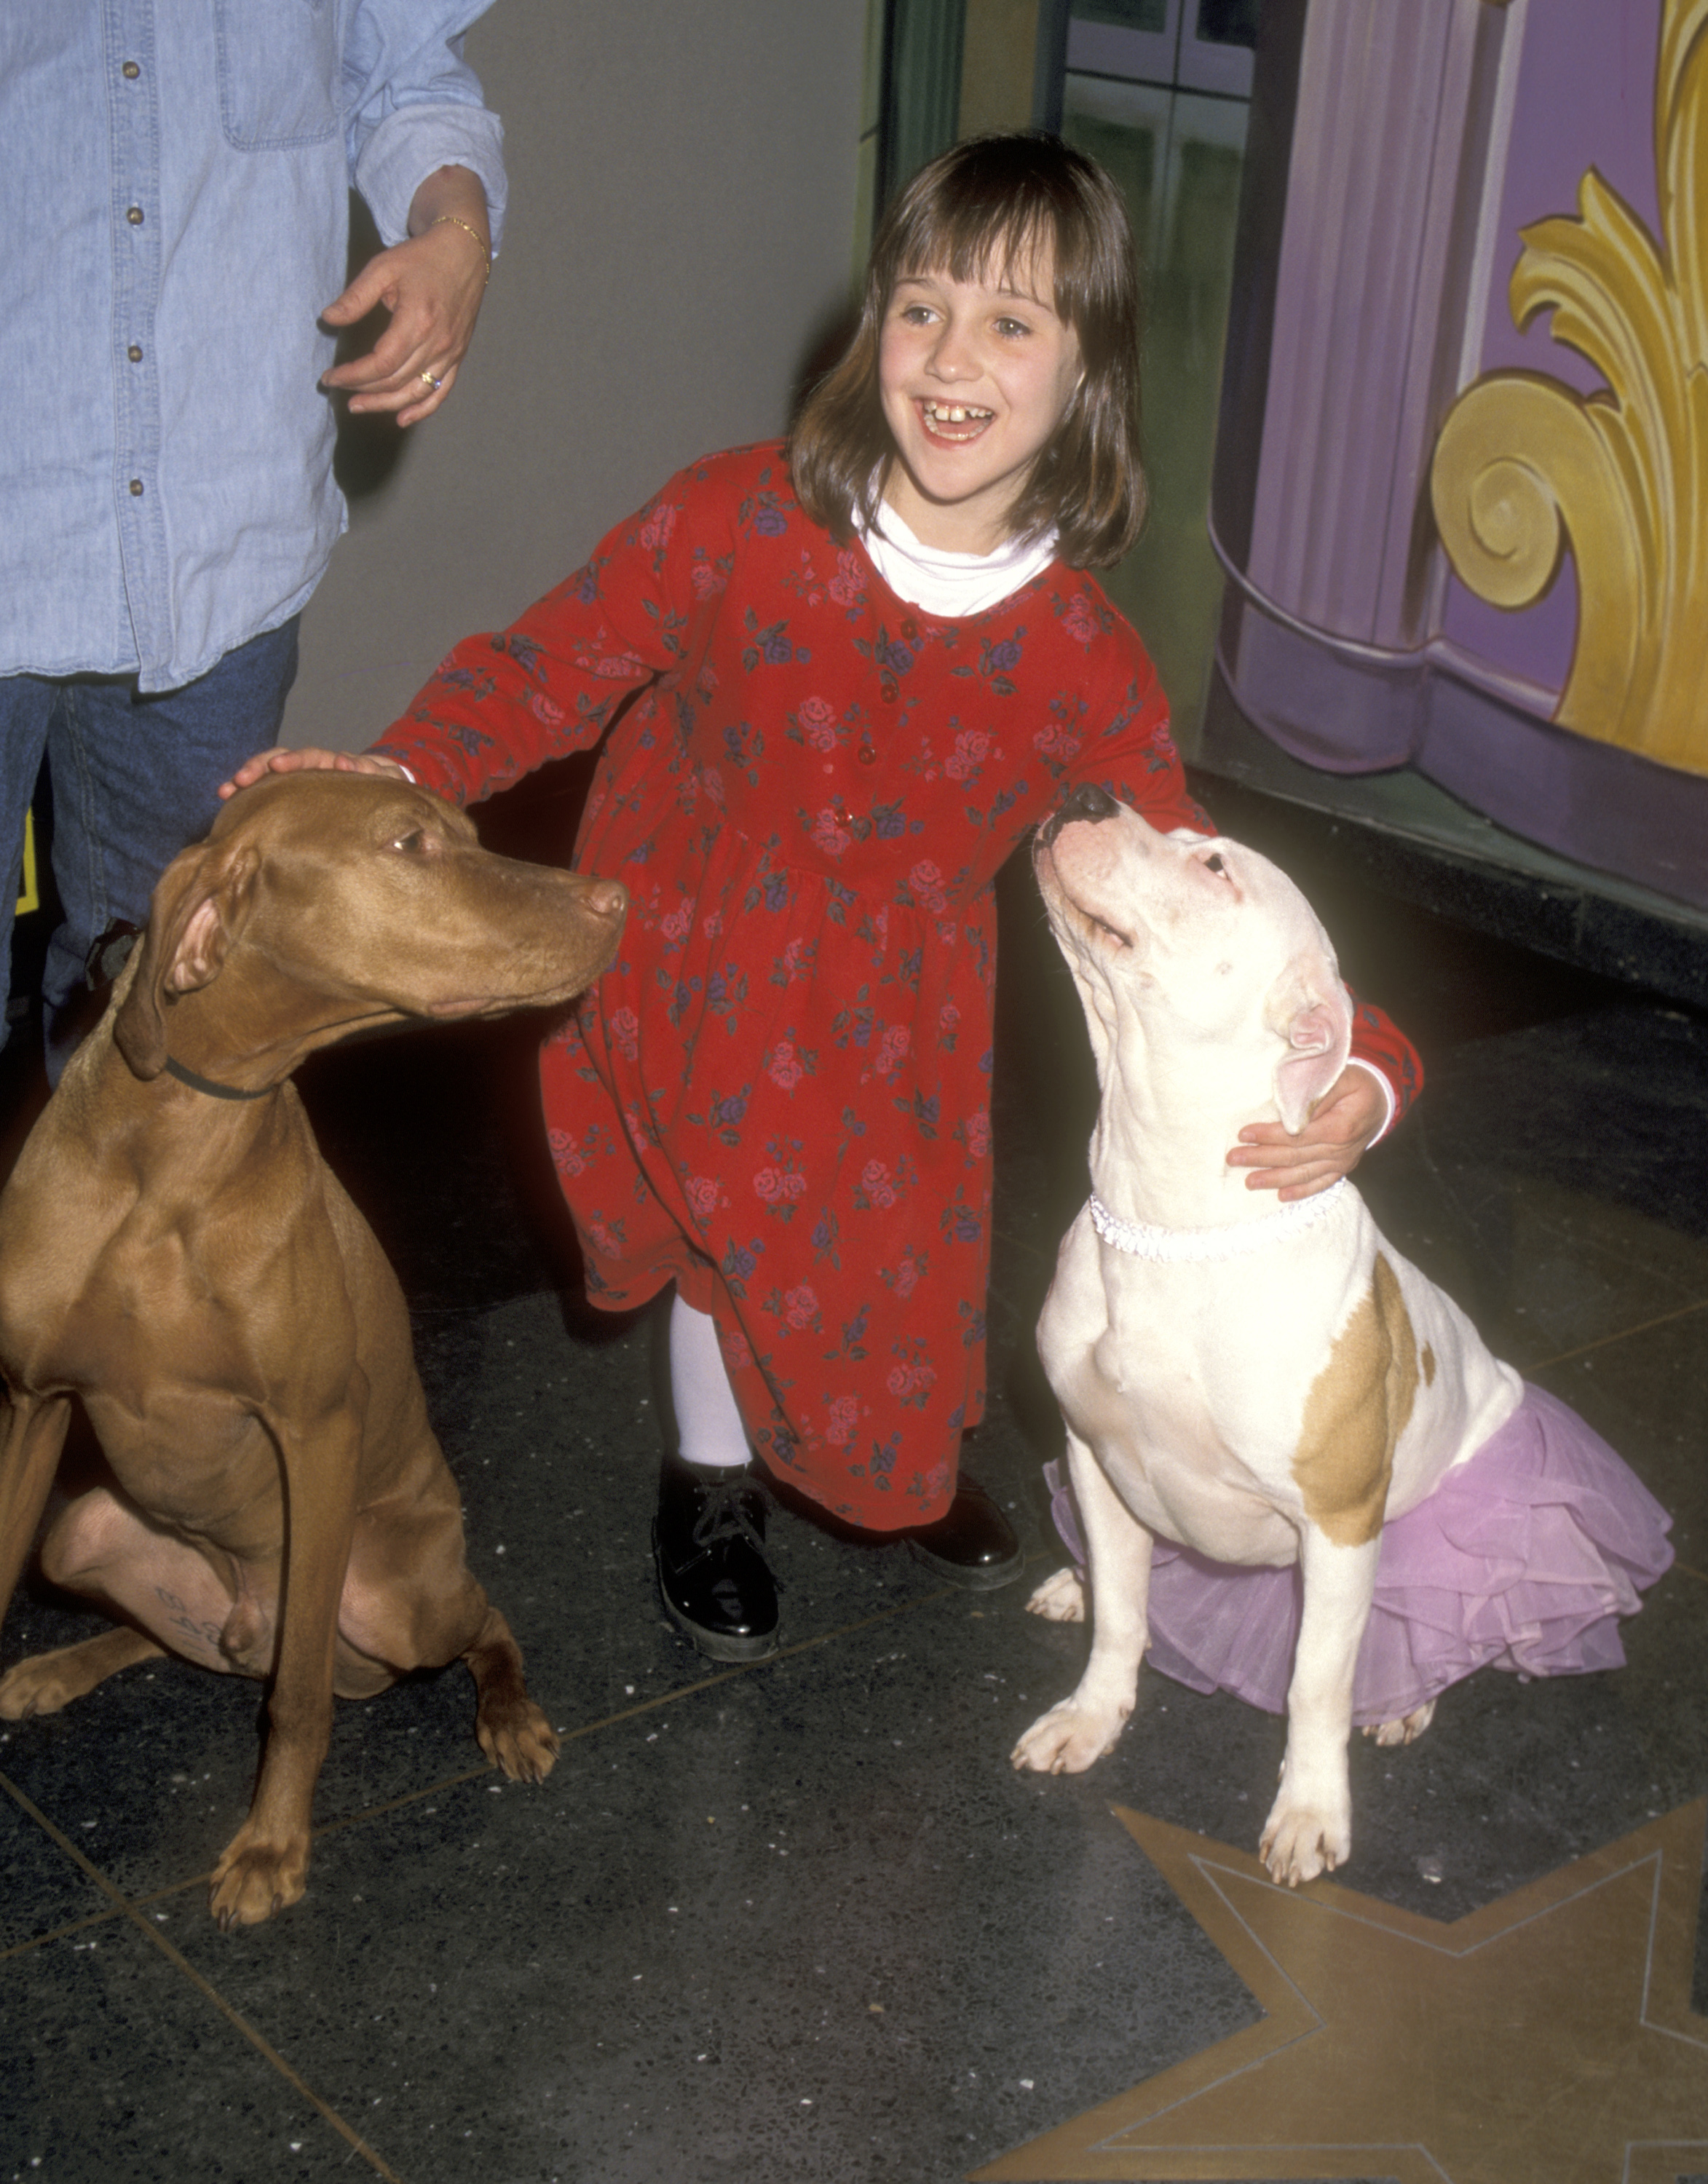 Mara Wilson besucht das M&amp;M's Candies Hollywood for Children Family Film Festival im Sony IMAX Theater am 8. April 1996 in New York City. | Quelle: Getty Images